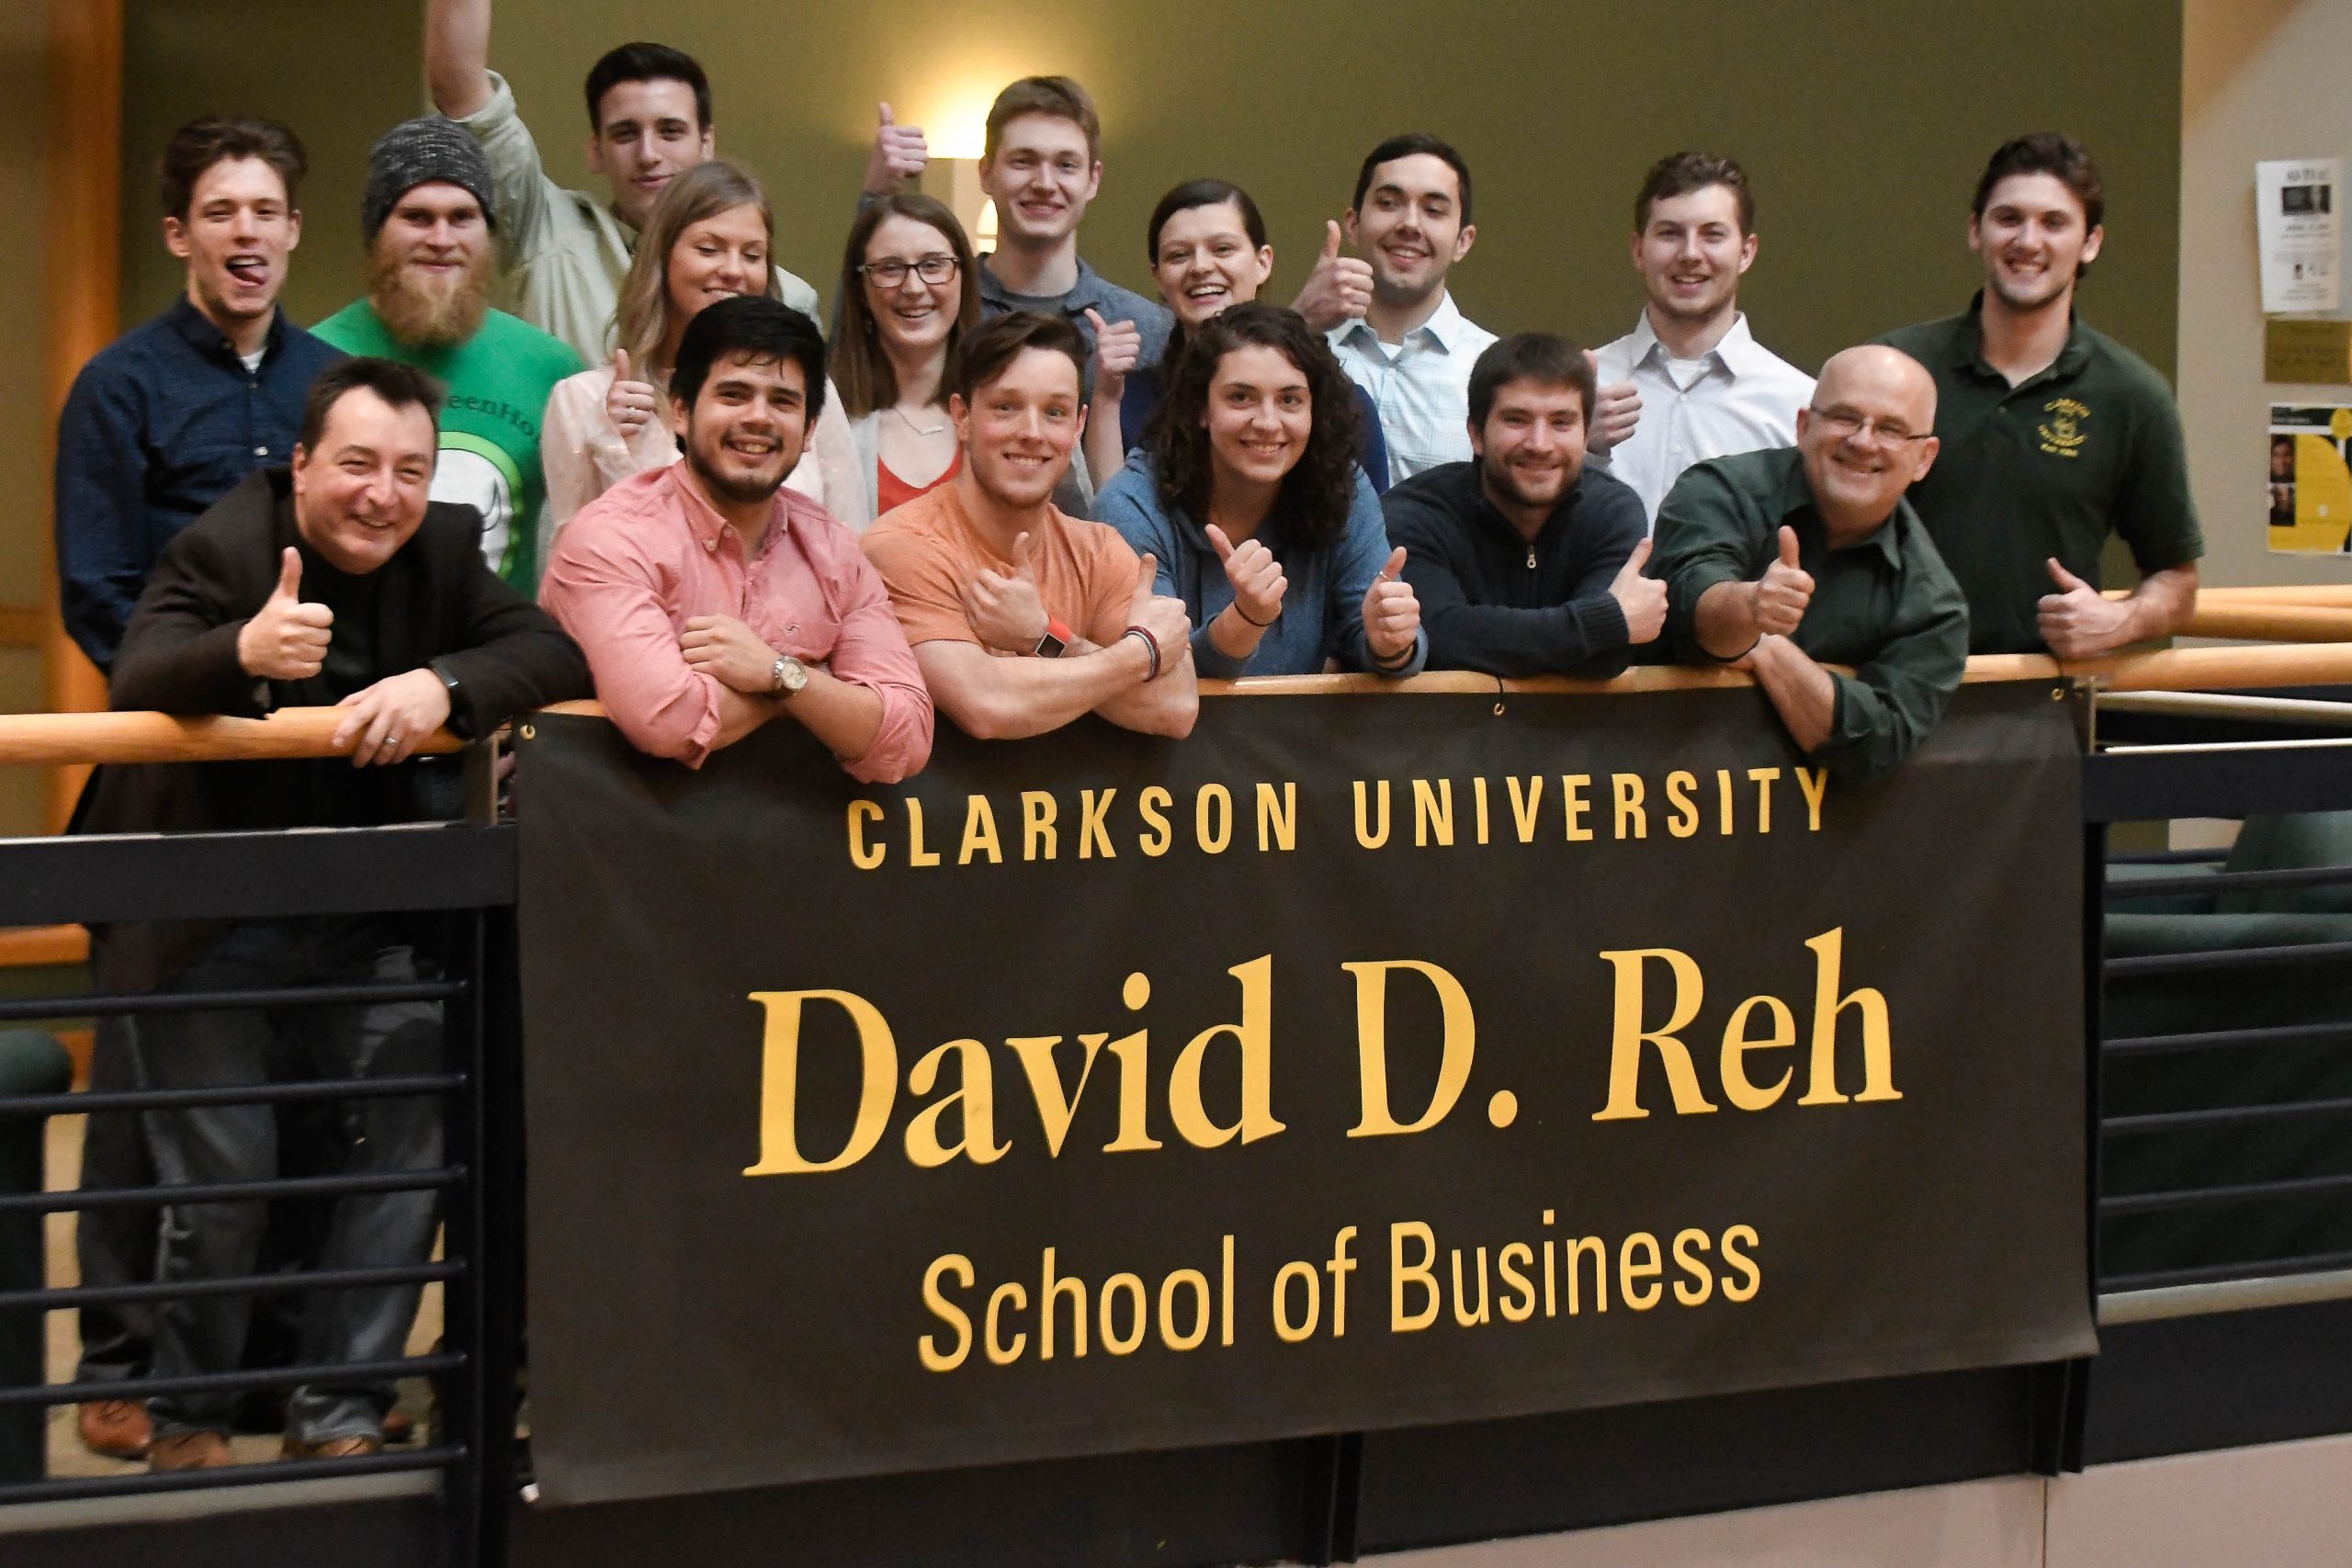 A large group of people standing behind the David D. Reh sign